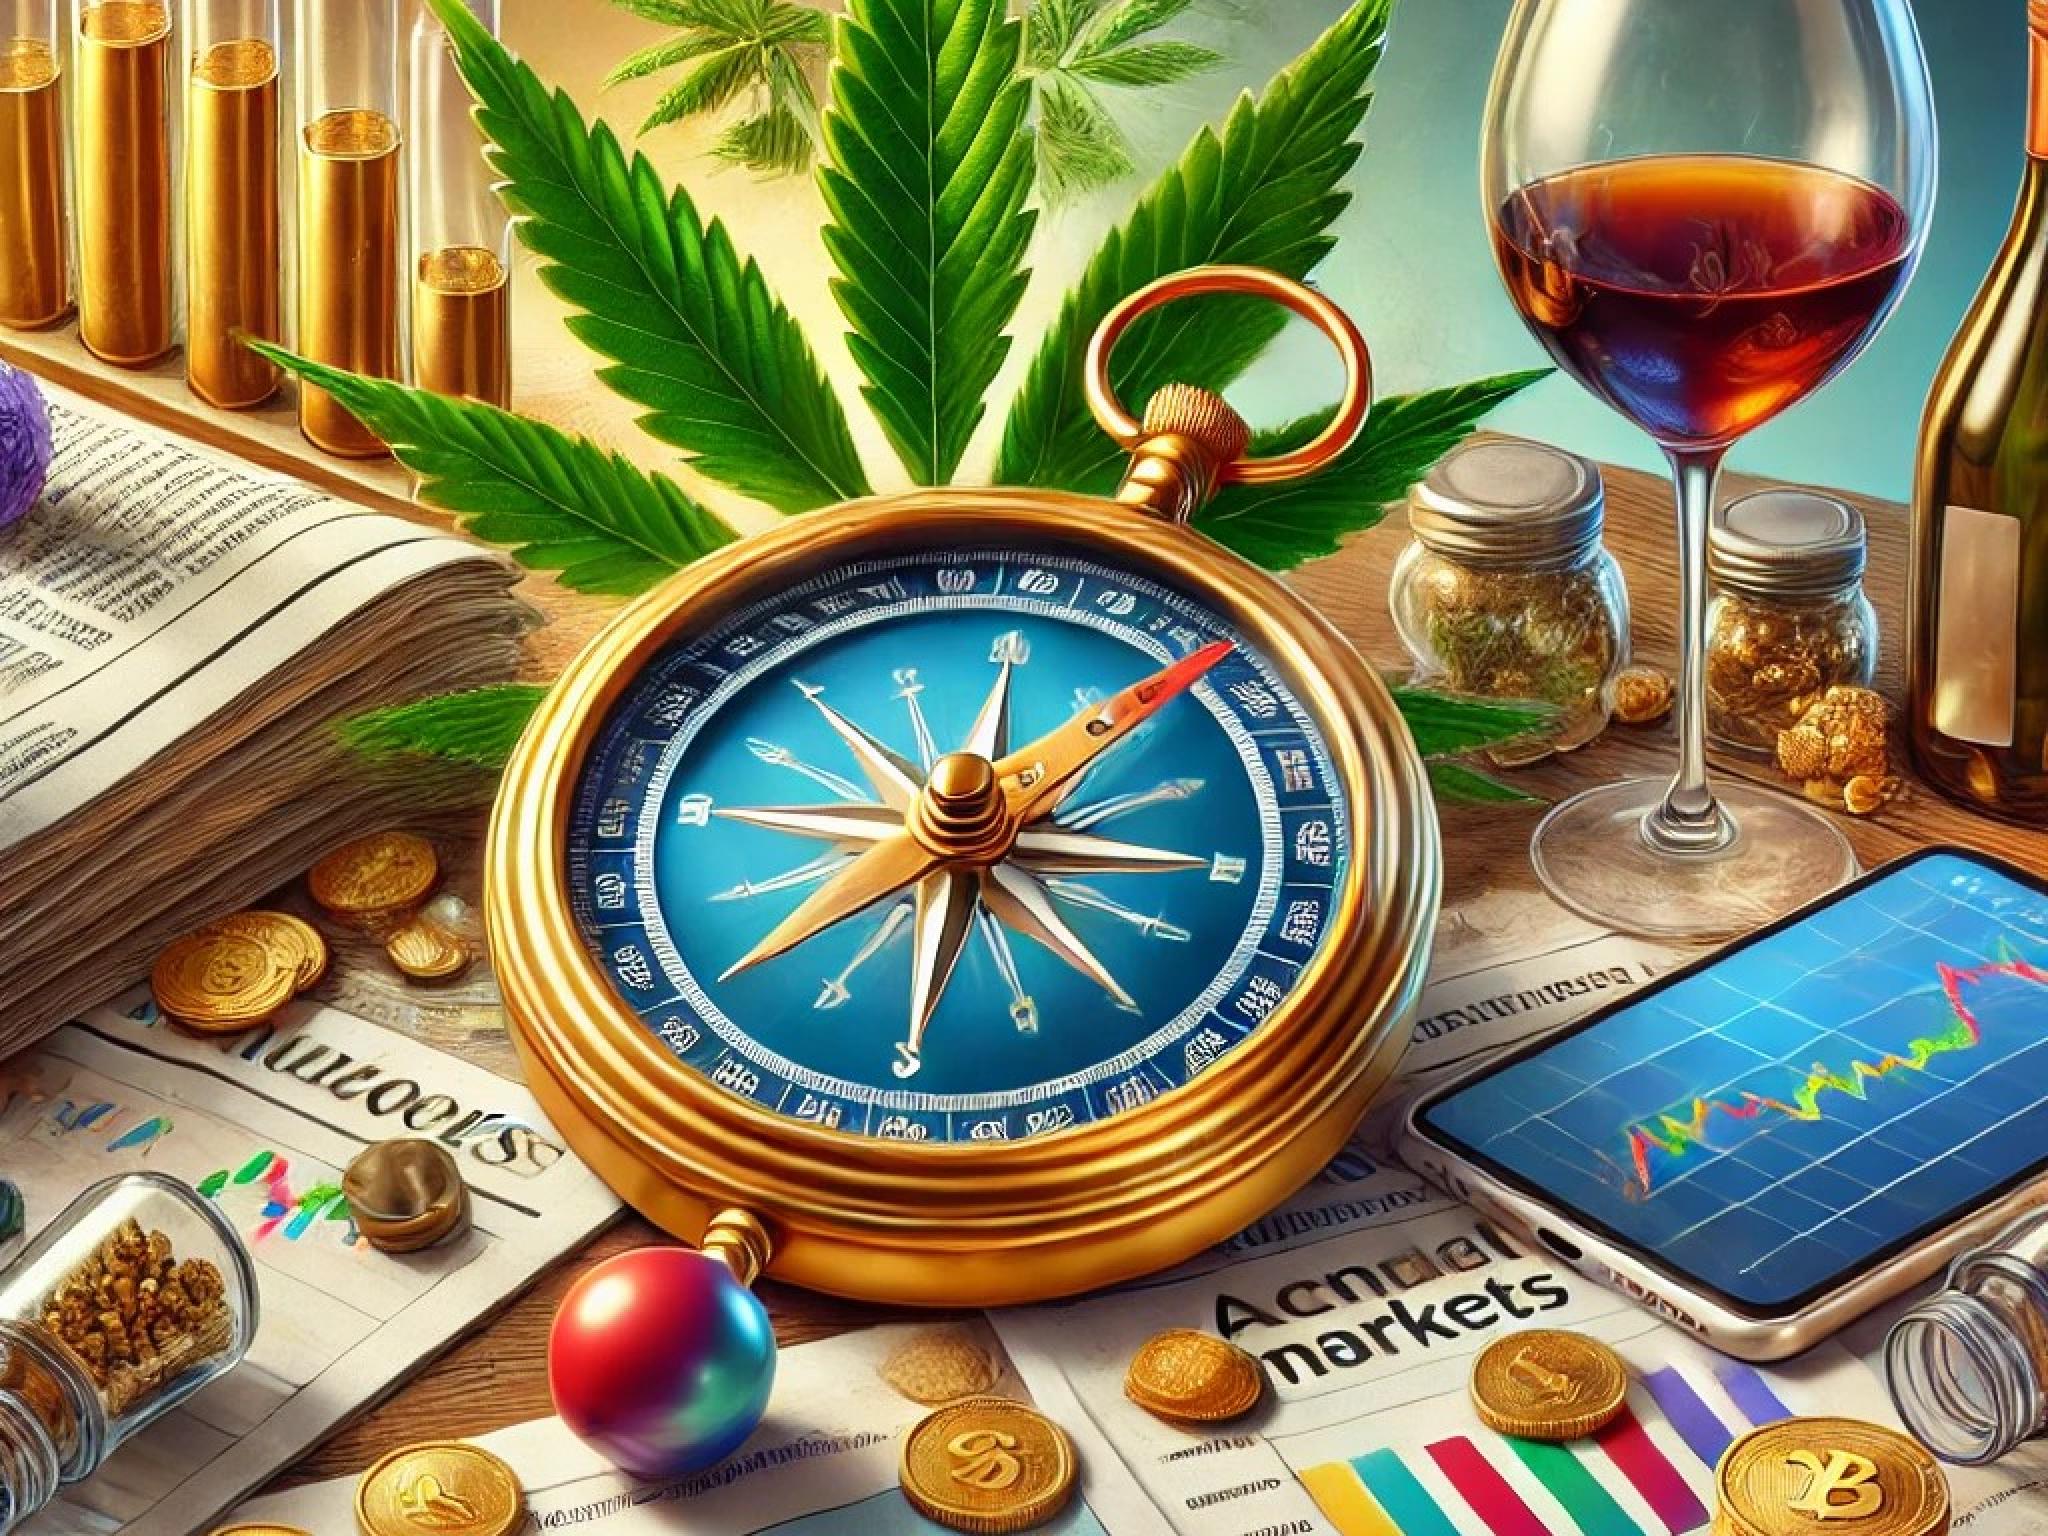  cannabis-found-less-harmful-than-alcohol-in-new-study-where-is-the-demand-heading-investor-market-tips 